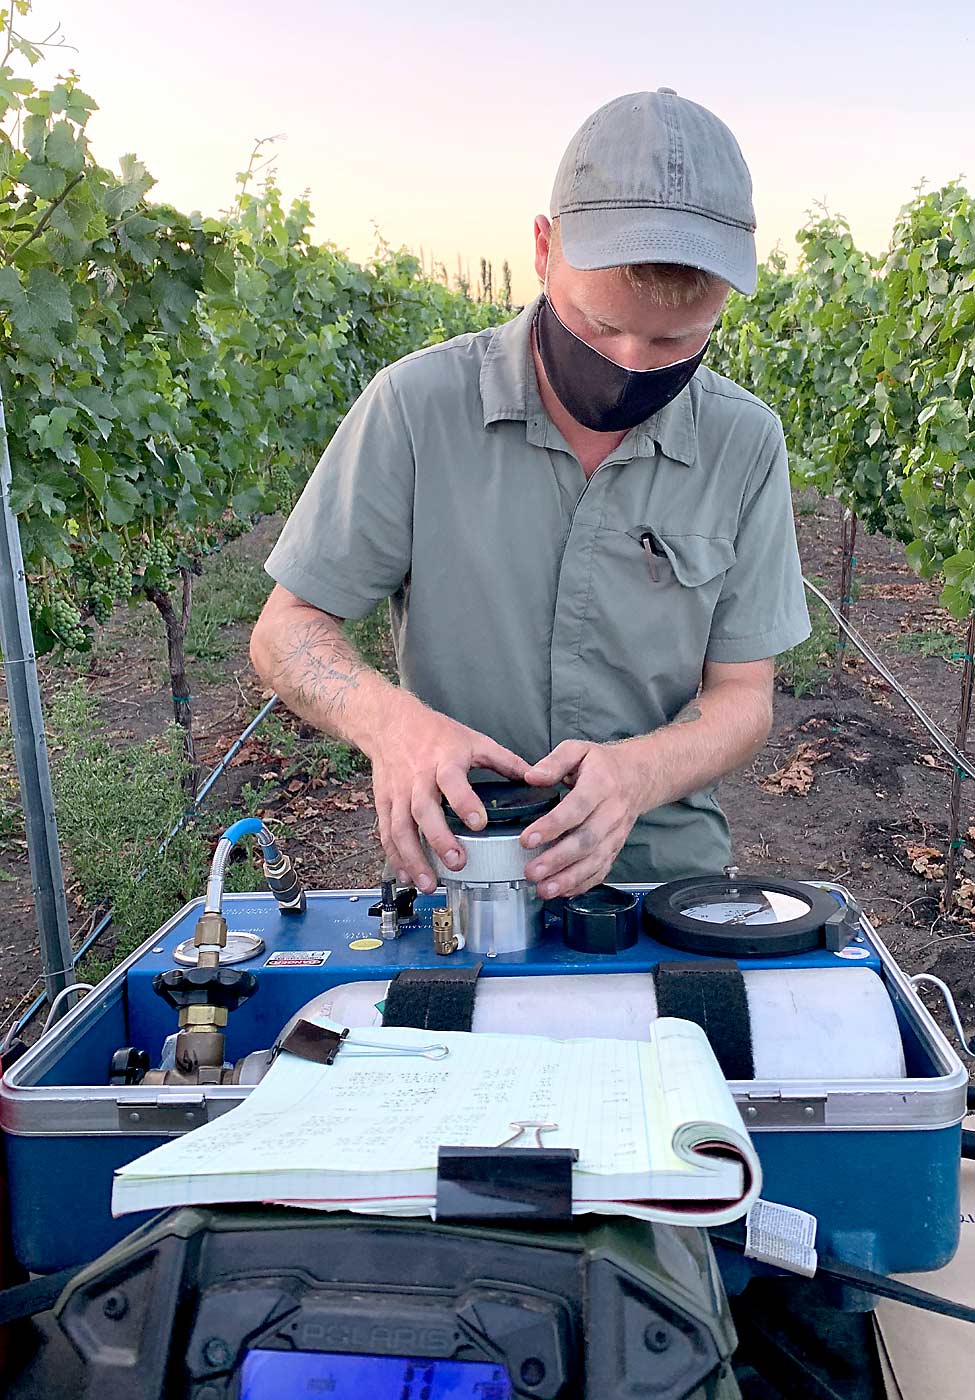 OSU graduate student Cody Copp measures leaf water potential in the vineyard just prior to harvest in 2020. (Courtesy Alexander Levin/Oregon State University)